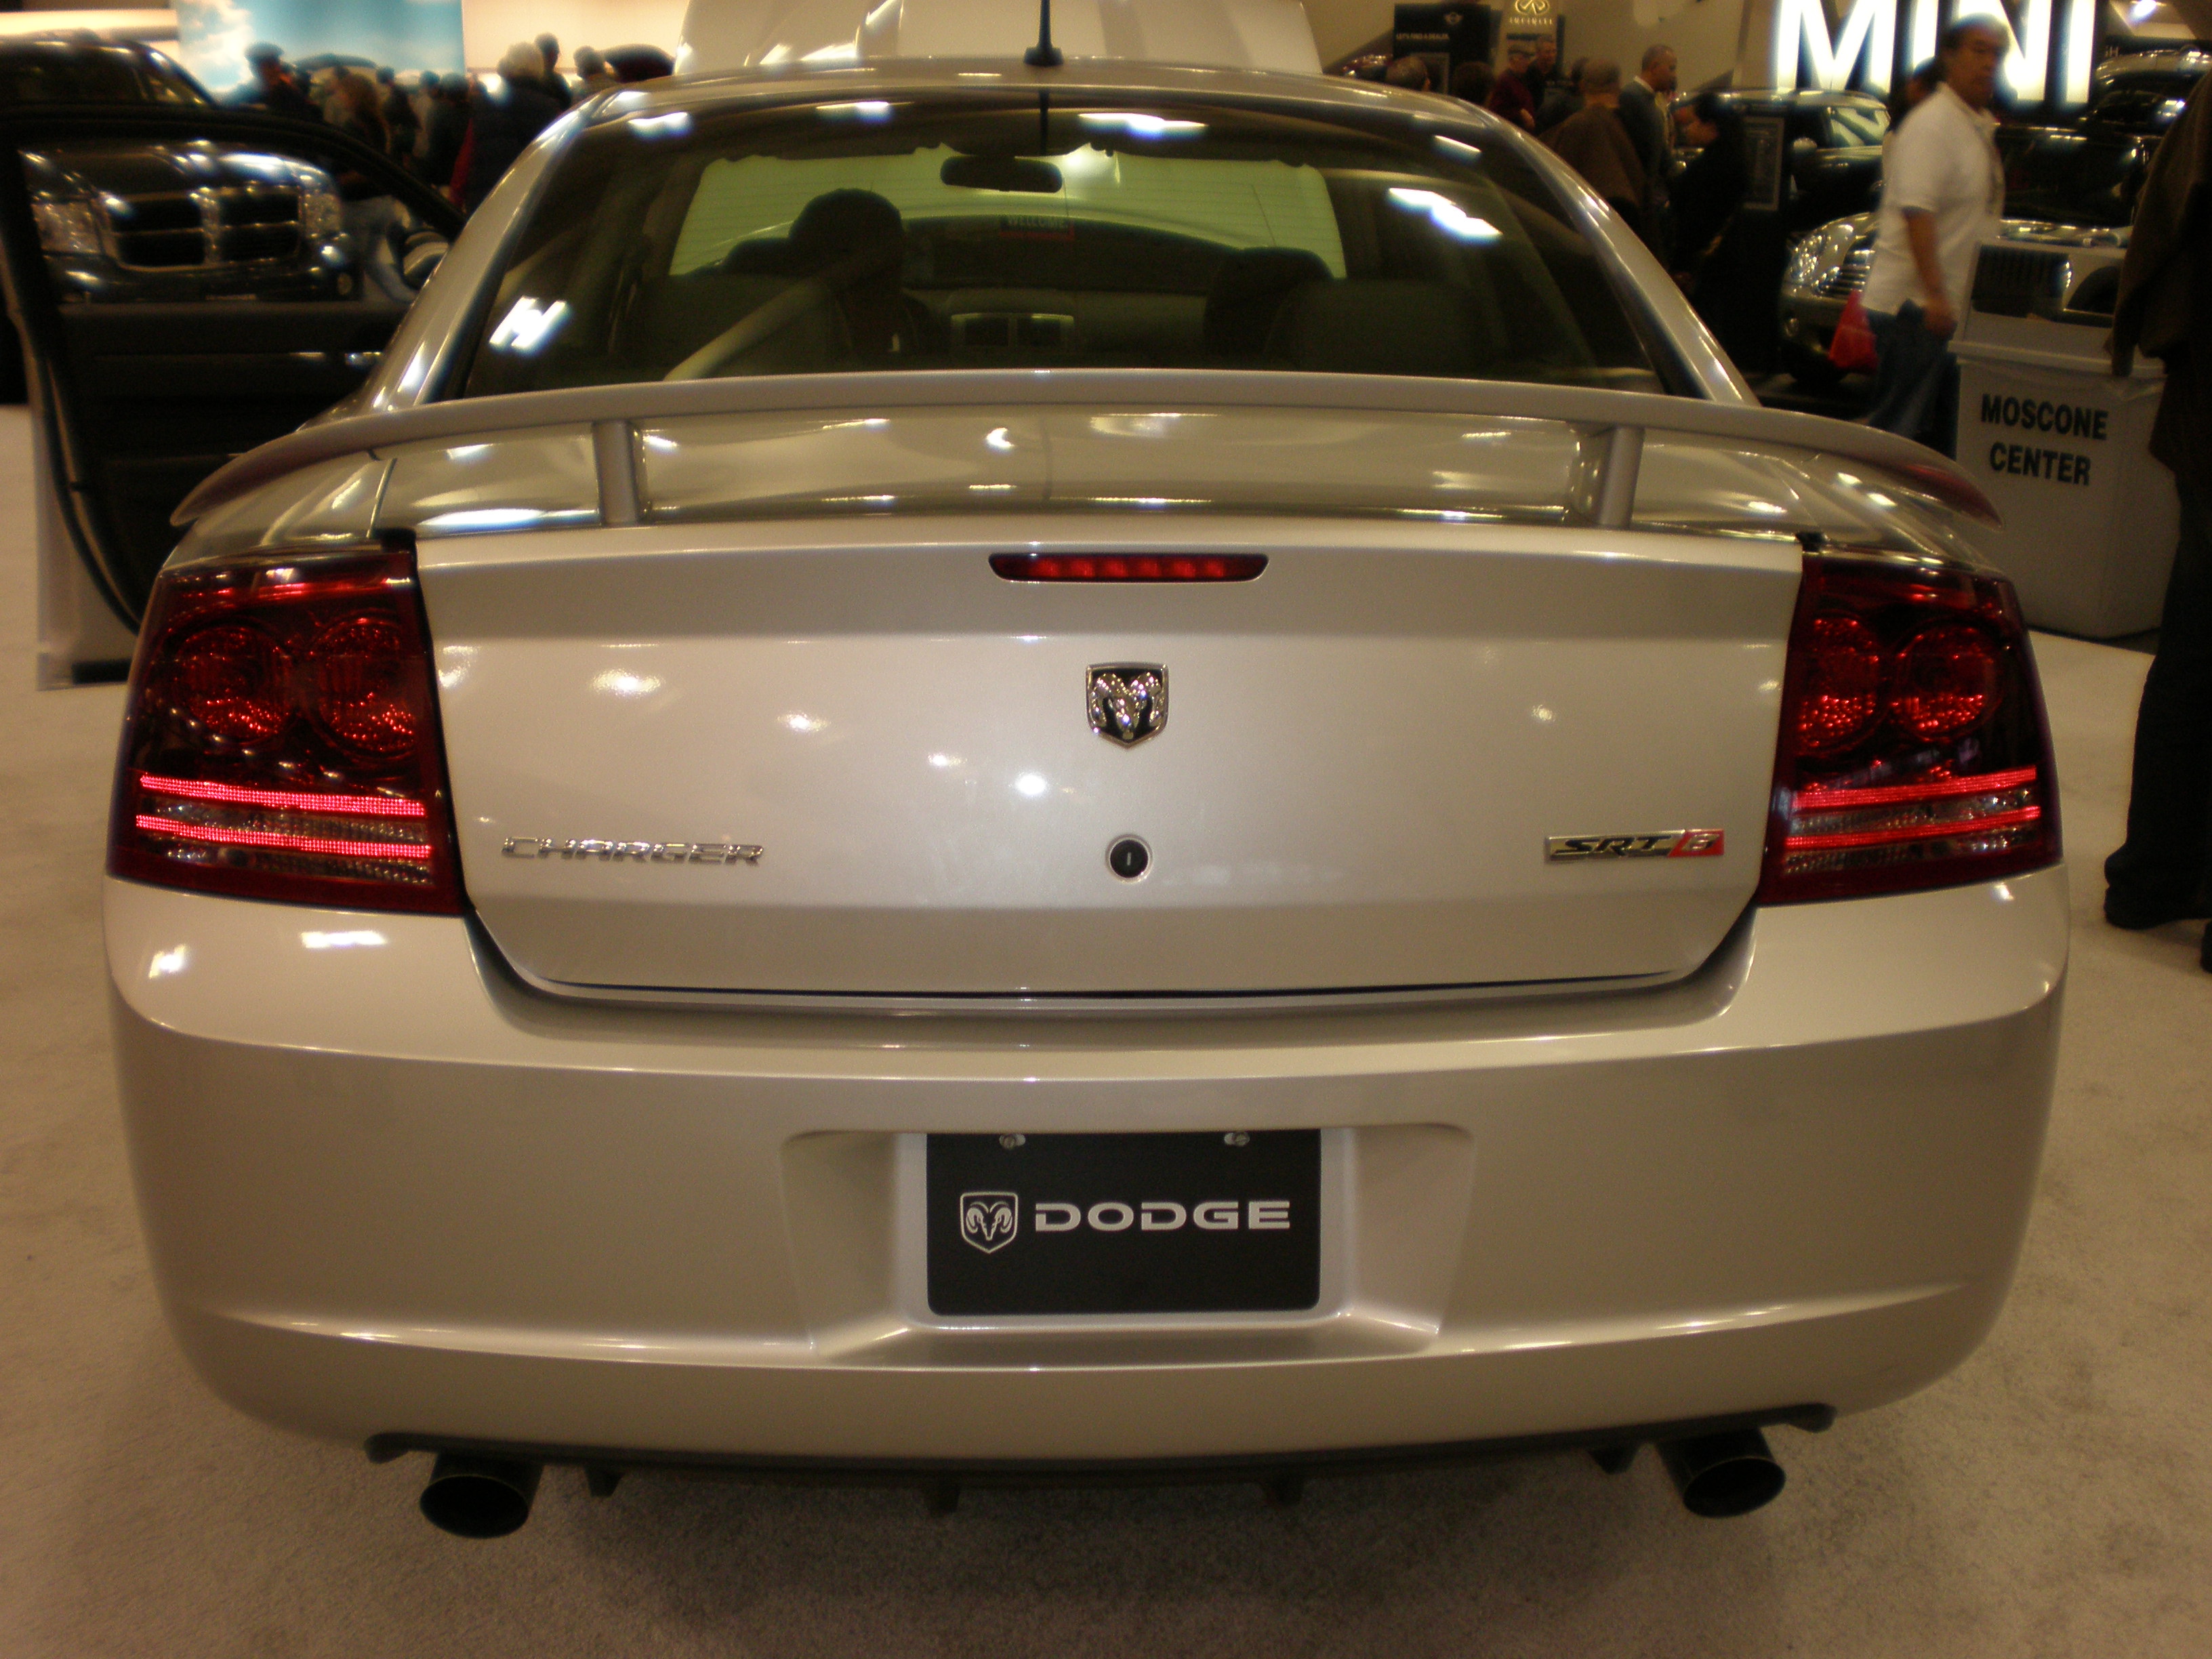 File:2008 silver Dodge Charger SRT-8  - Wikimedia Commons